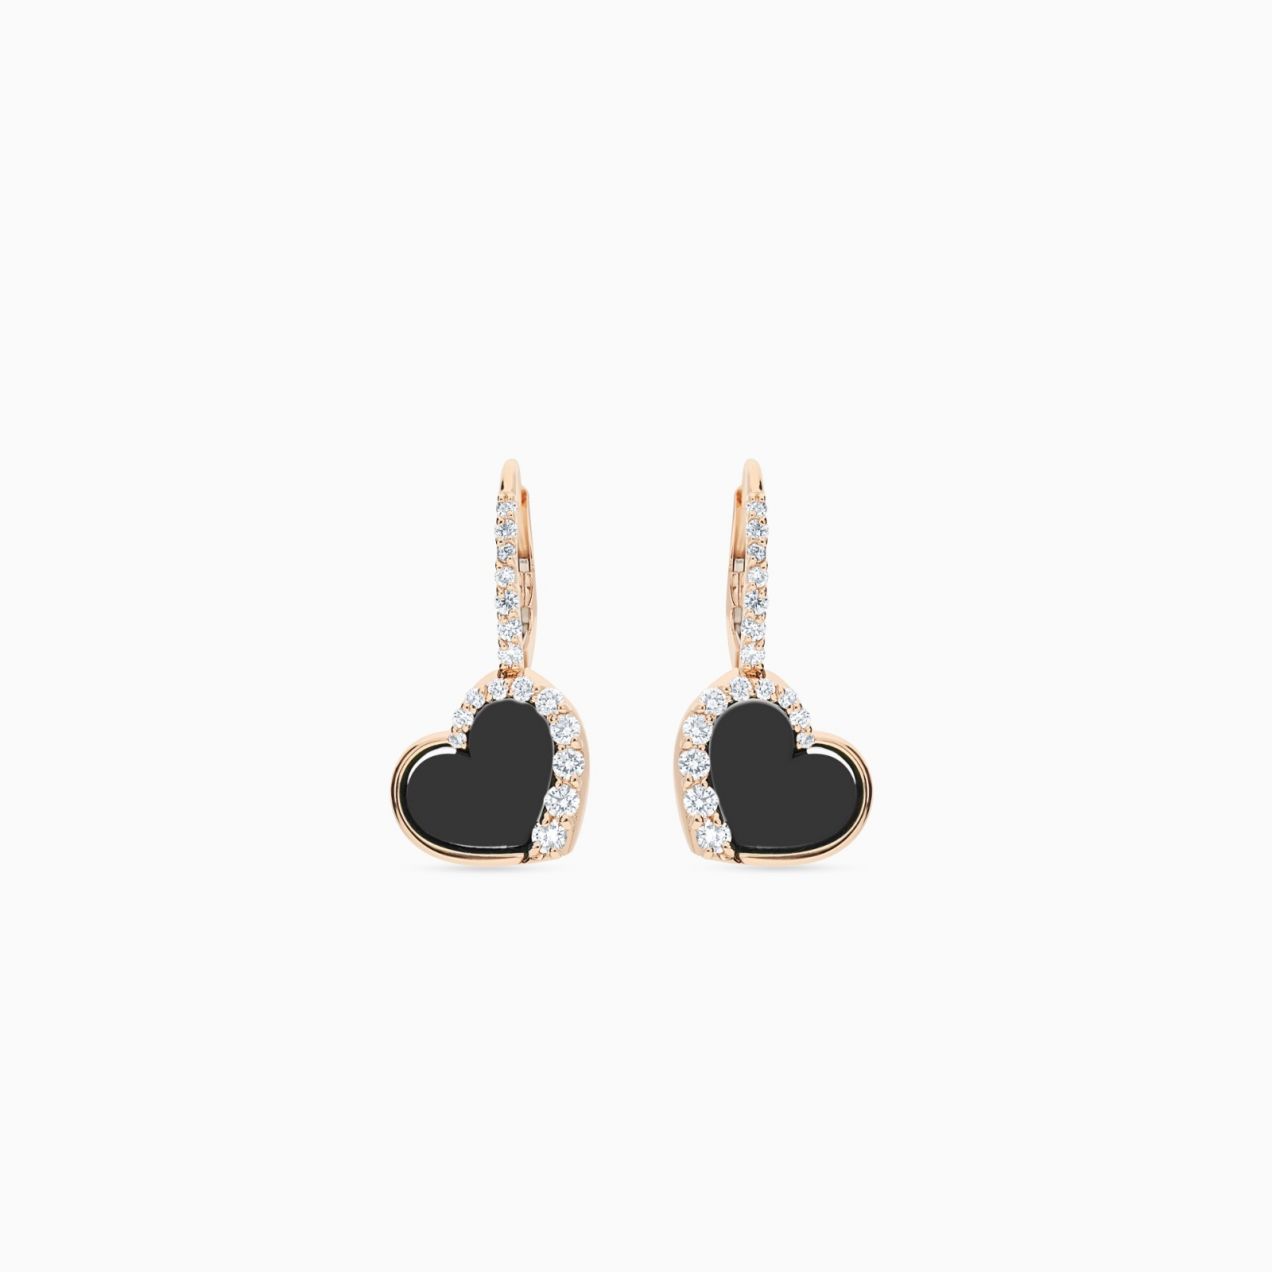 Heart-shaped earrings in rose gold with onyx and diamonds